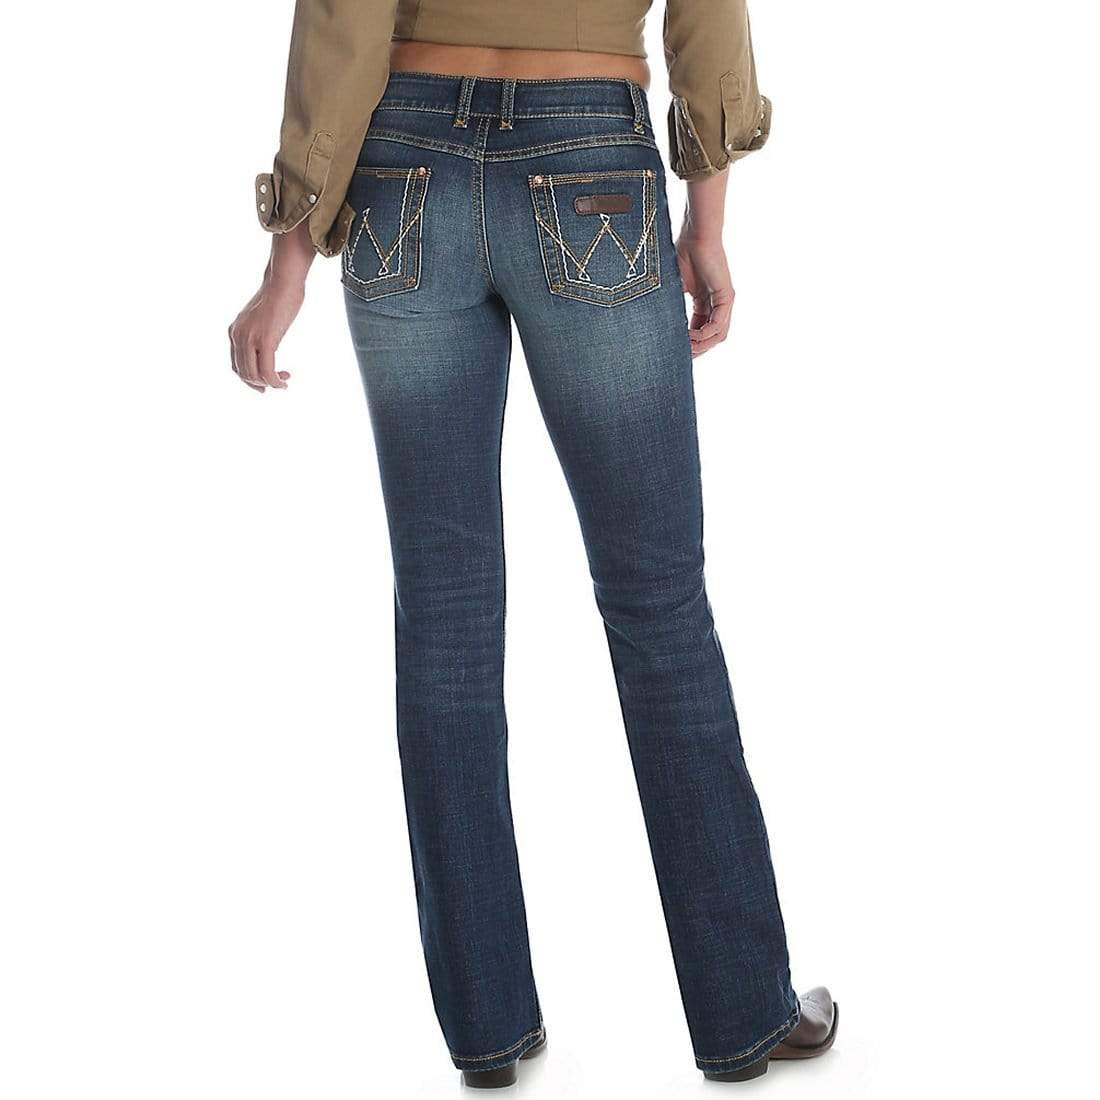 Wrangler Womens Mae Premium Patch Jeans - W. Titley & Co